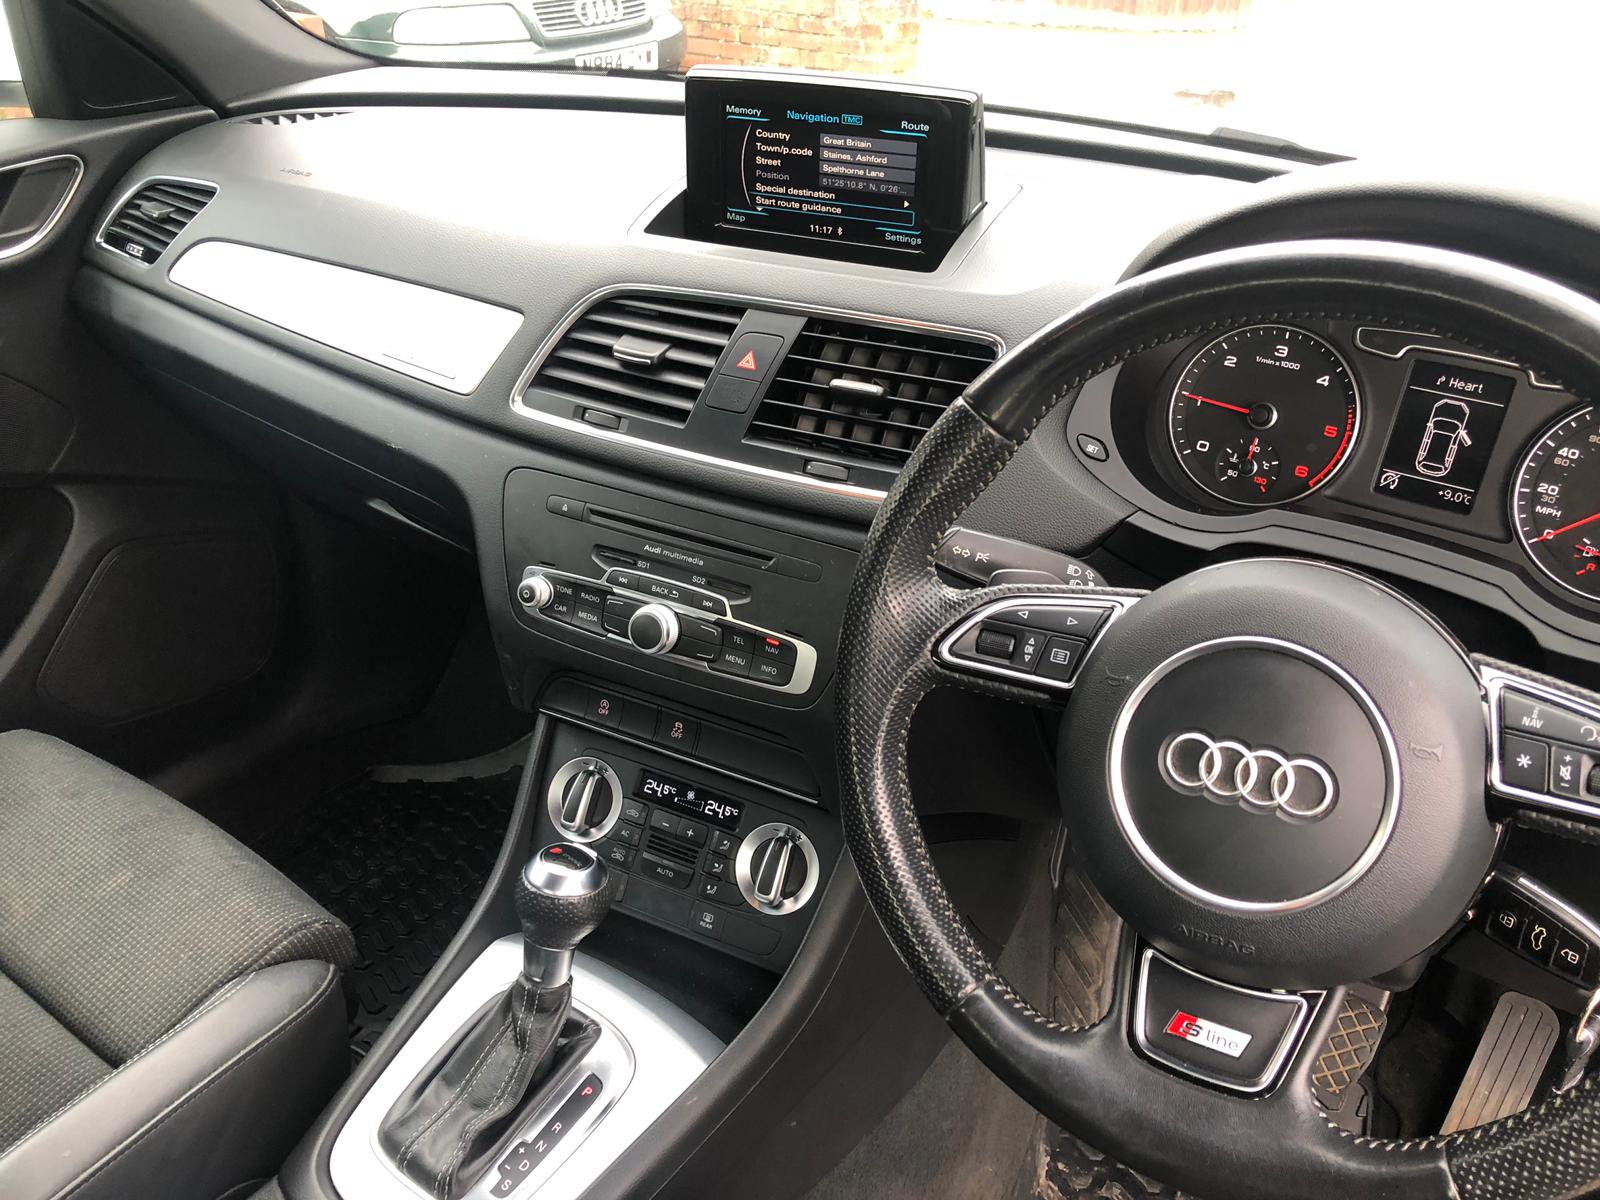 Audi Q3 S-Line. 2013/13 Reg. 45,000 miles. MOT 25th November 2020. This car is in perfect condition. - Image 12 of 23